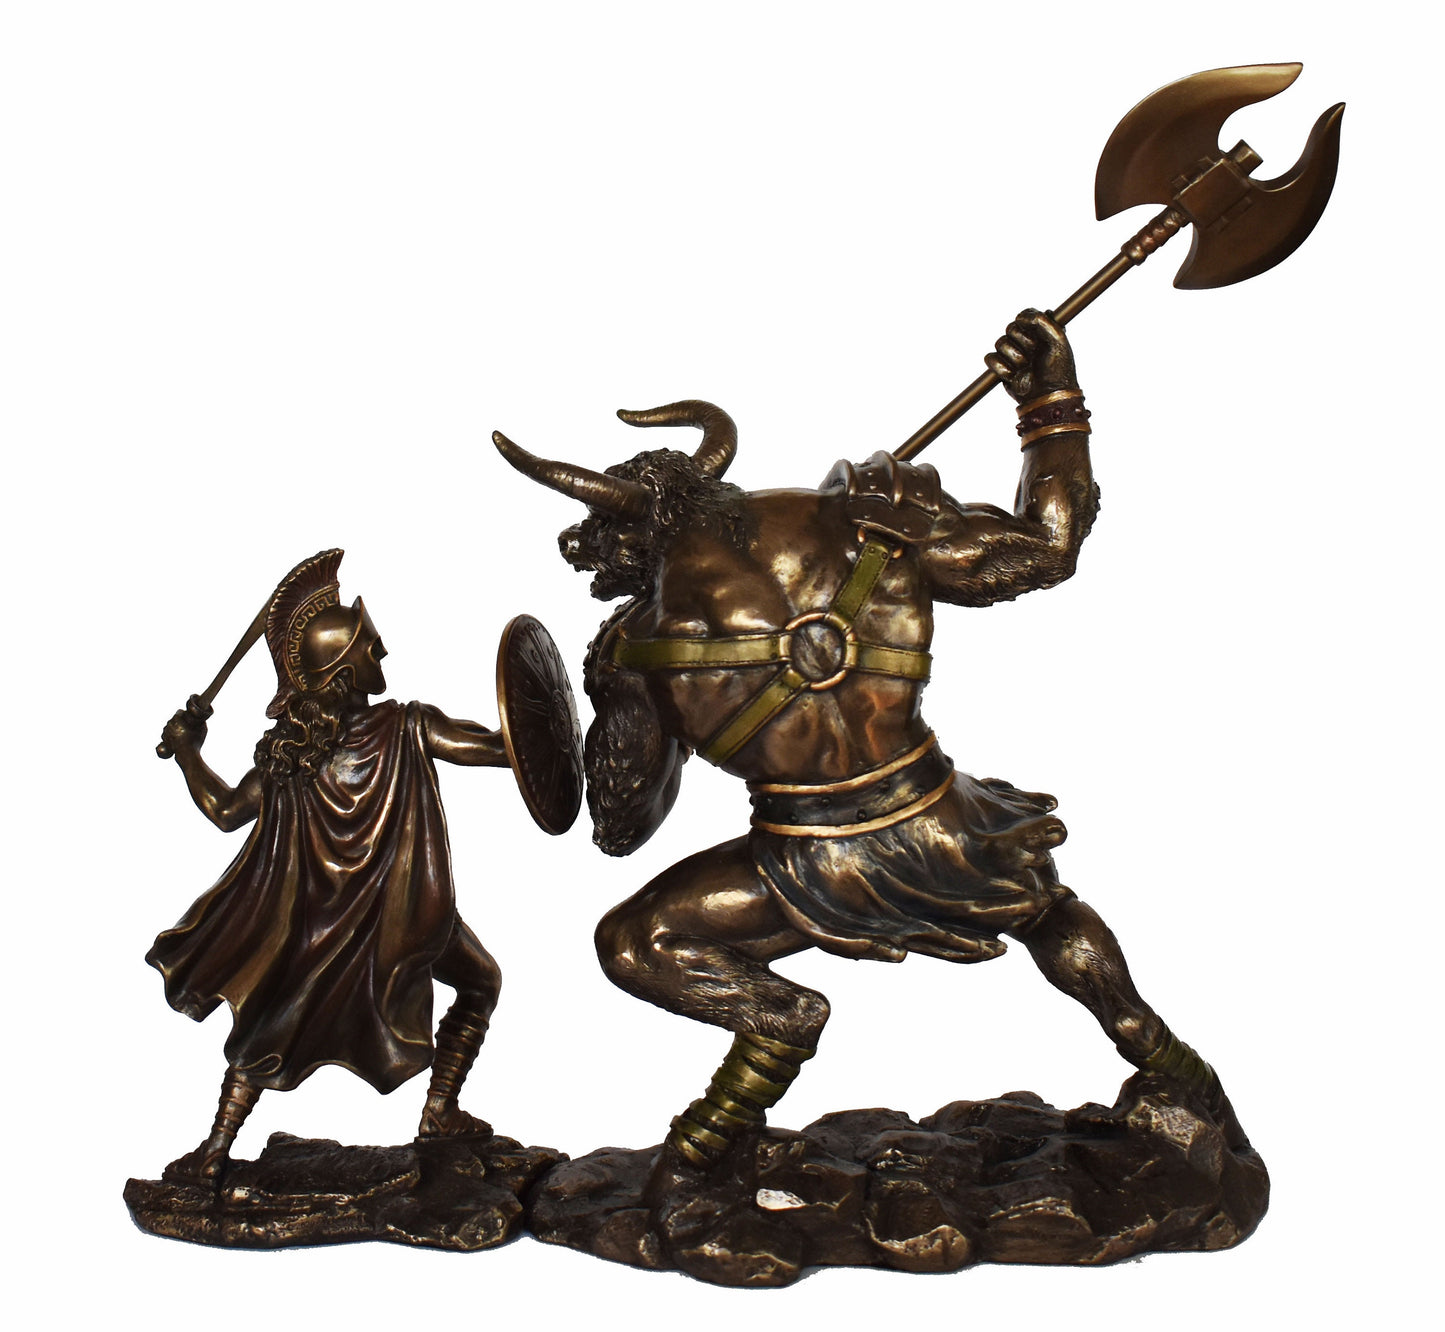 Theseus and the Minotaur - Set - Fight in the Labyrinth of Crete - Hero against Beast - Cold Cast Bronze Resin